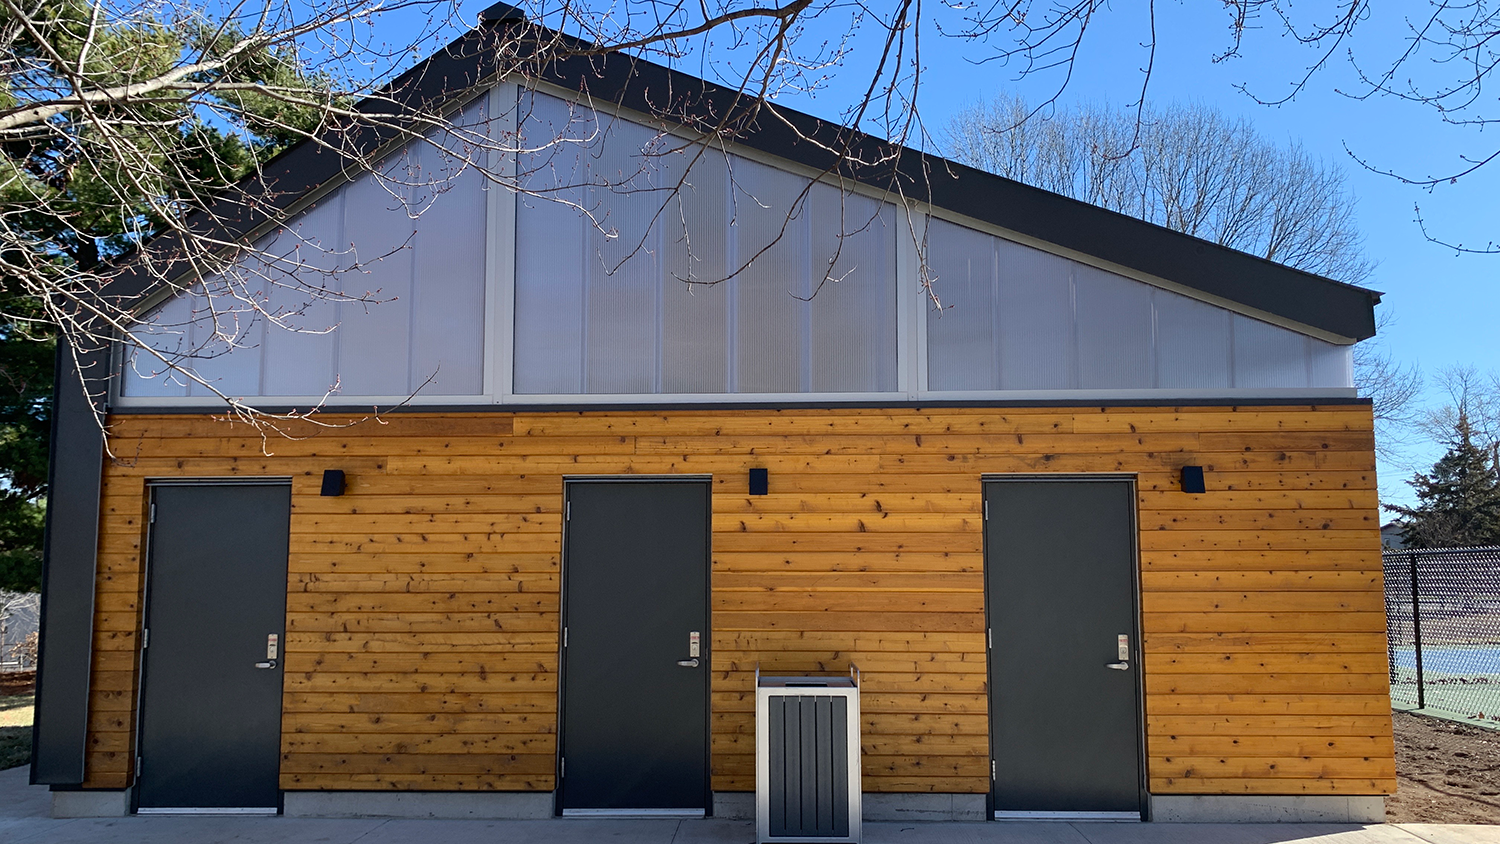 A newly constructed, solar-powered restroom facility at Maple Hills Park.